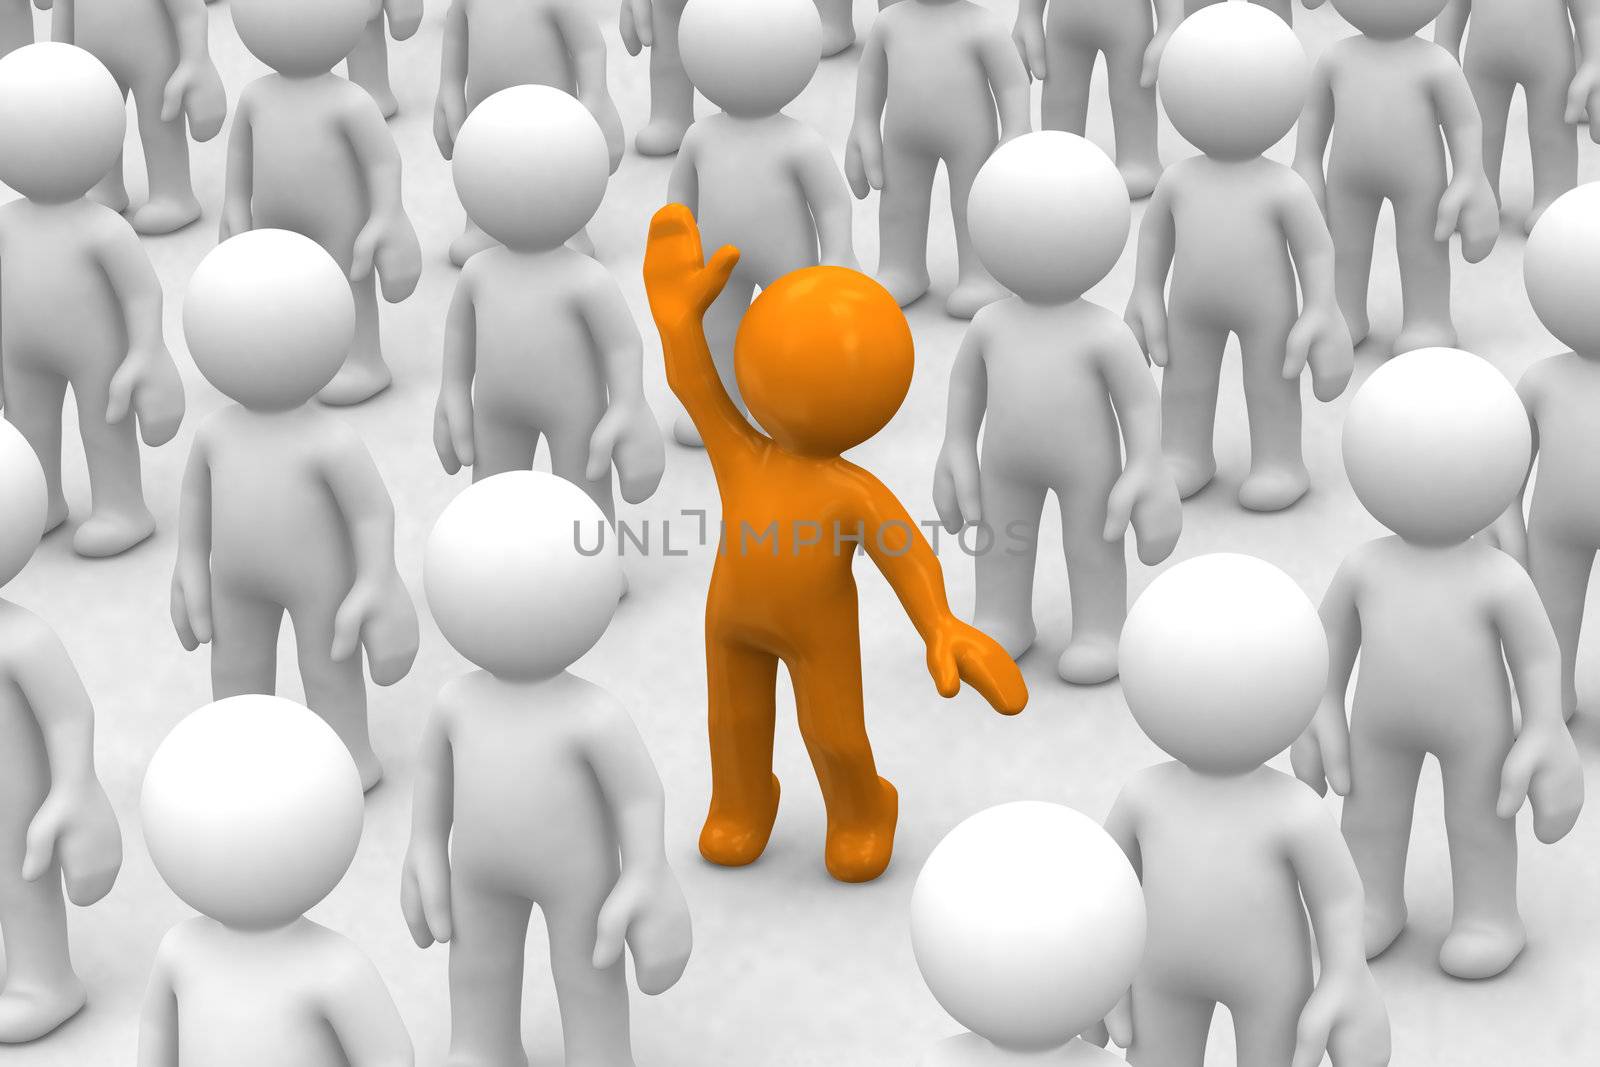 3d human who is different from the crowd